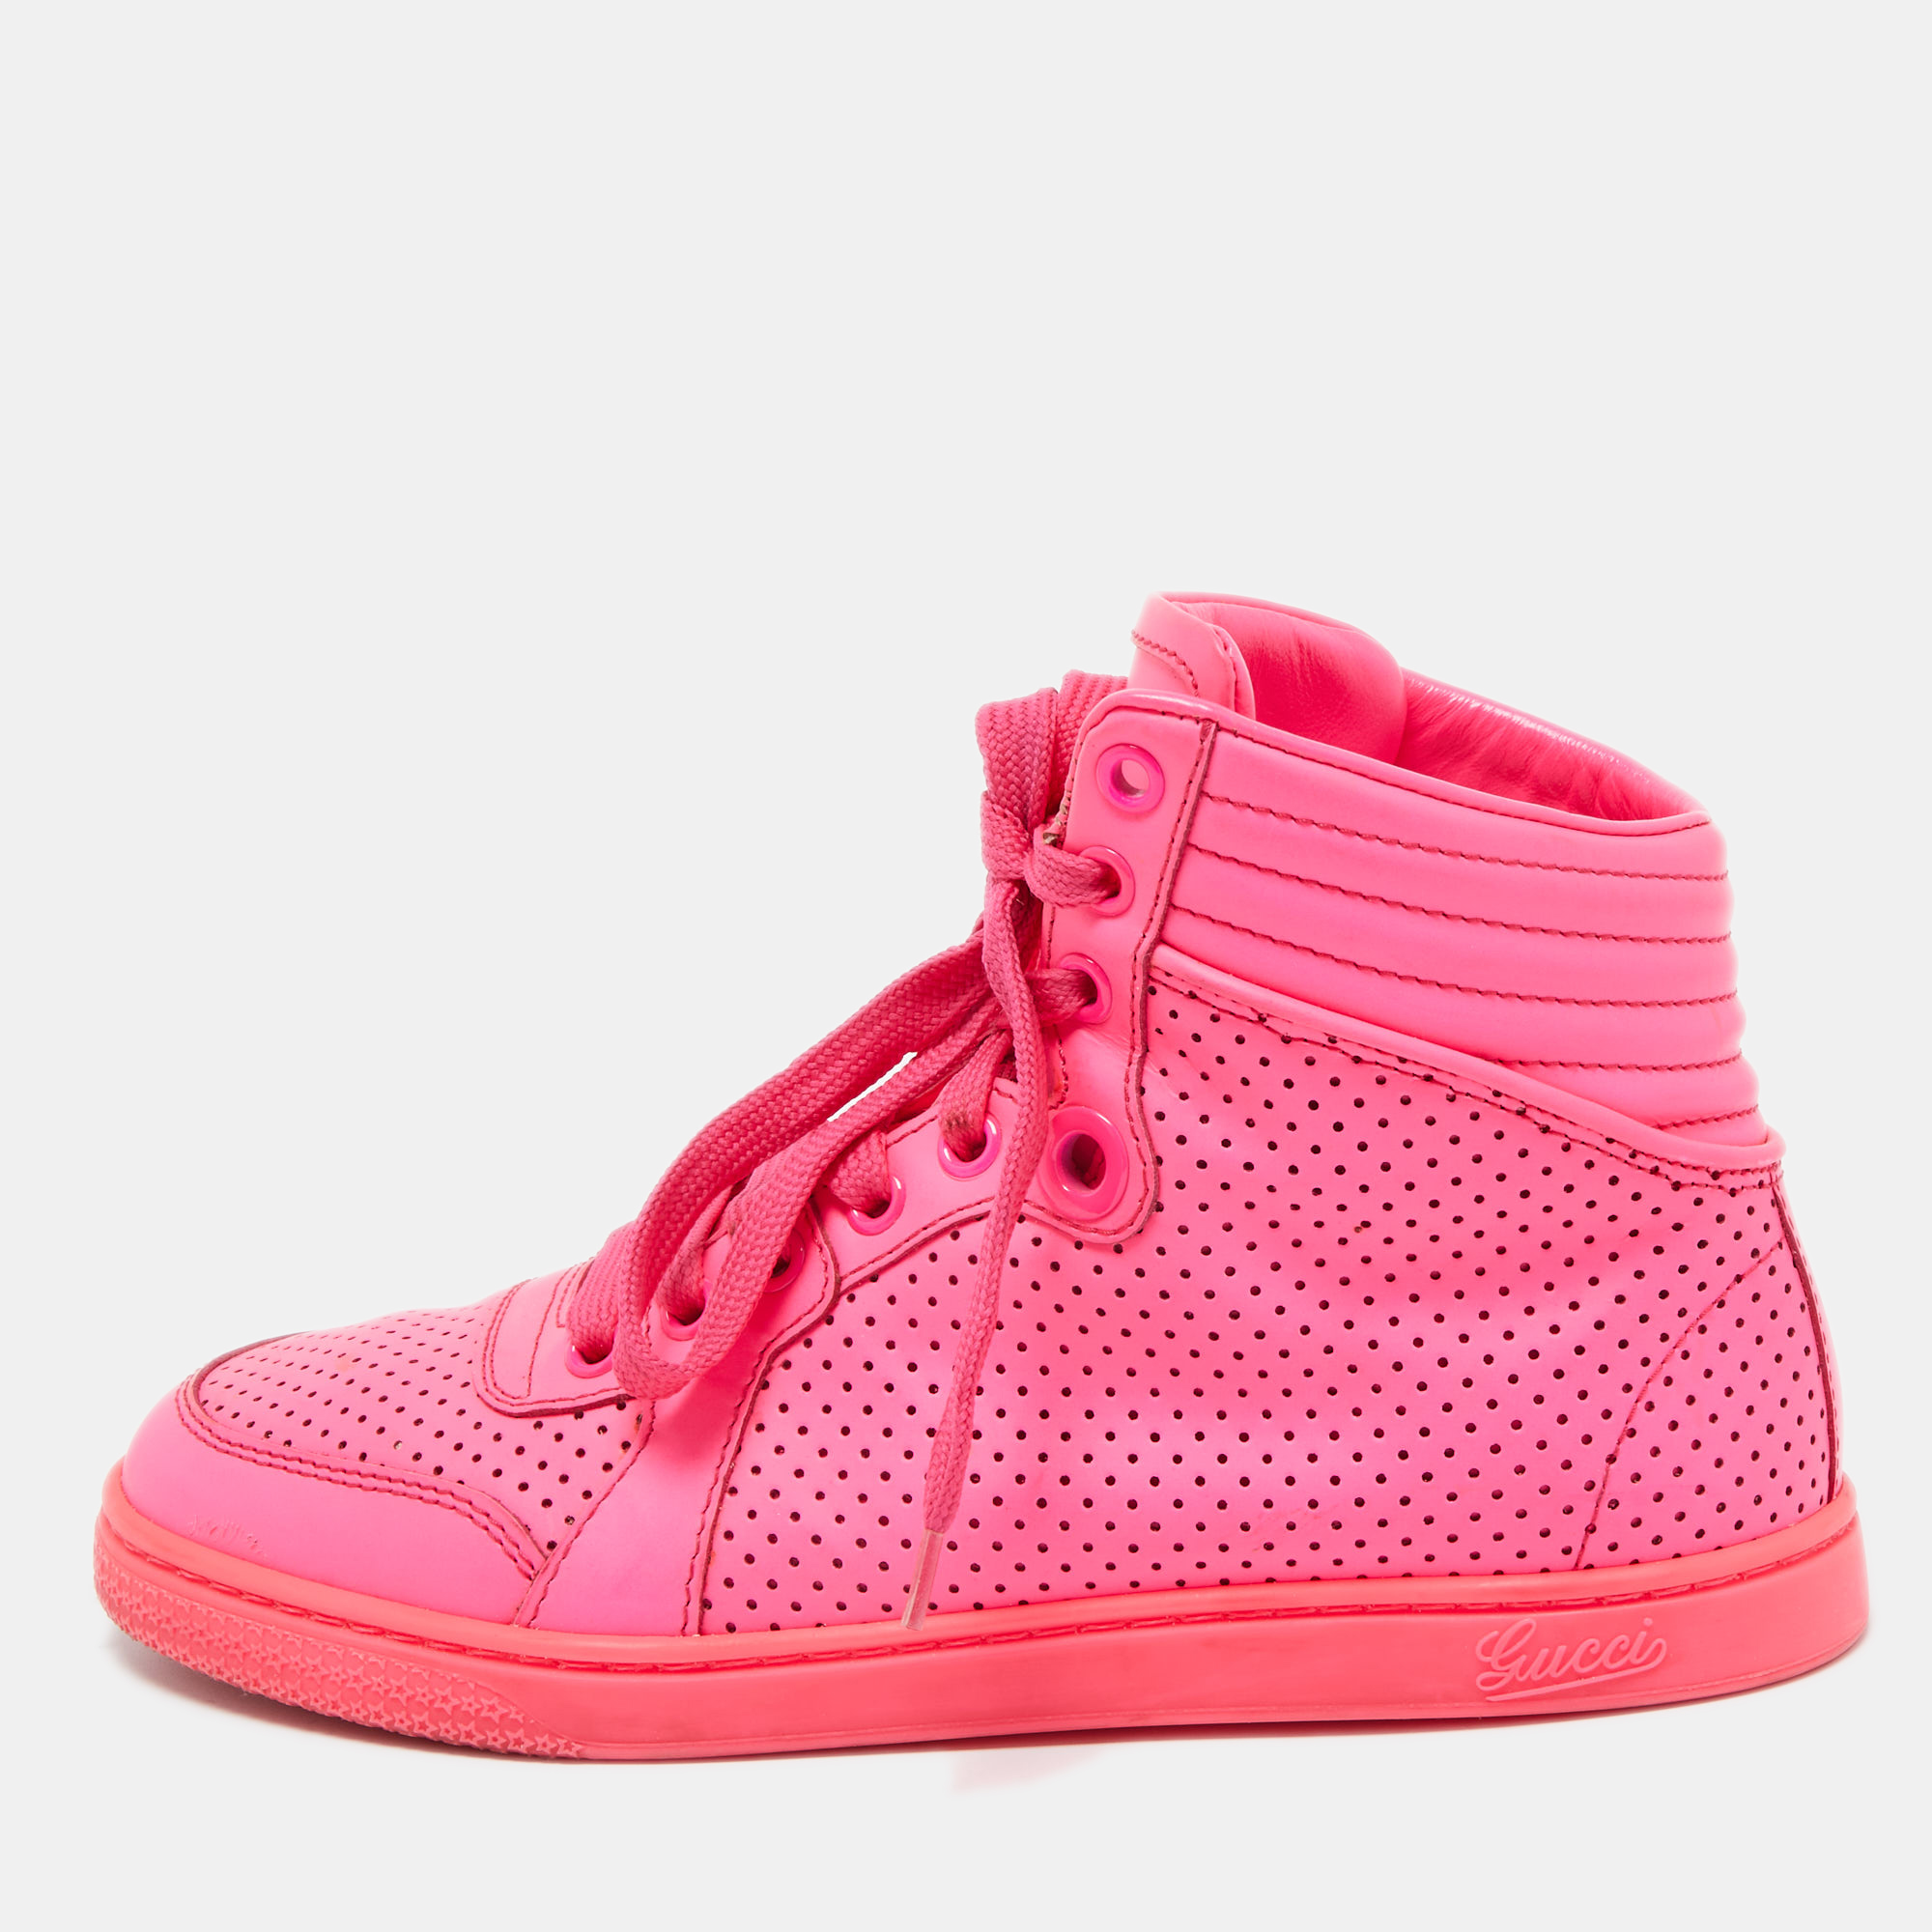 Pre-owned Gucci Neon Pink Perforated Leather Coda High Top Trainers Size 35.5